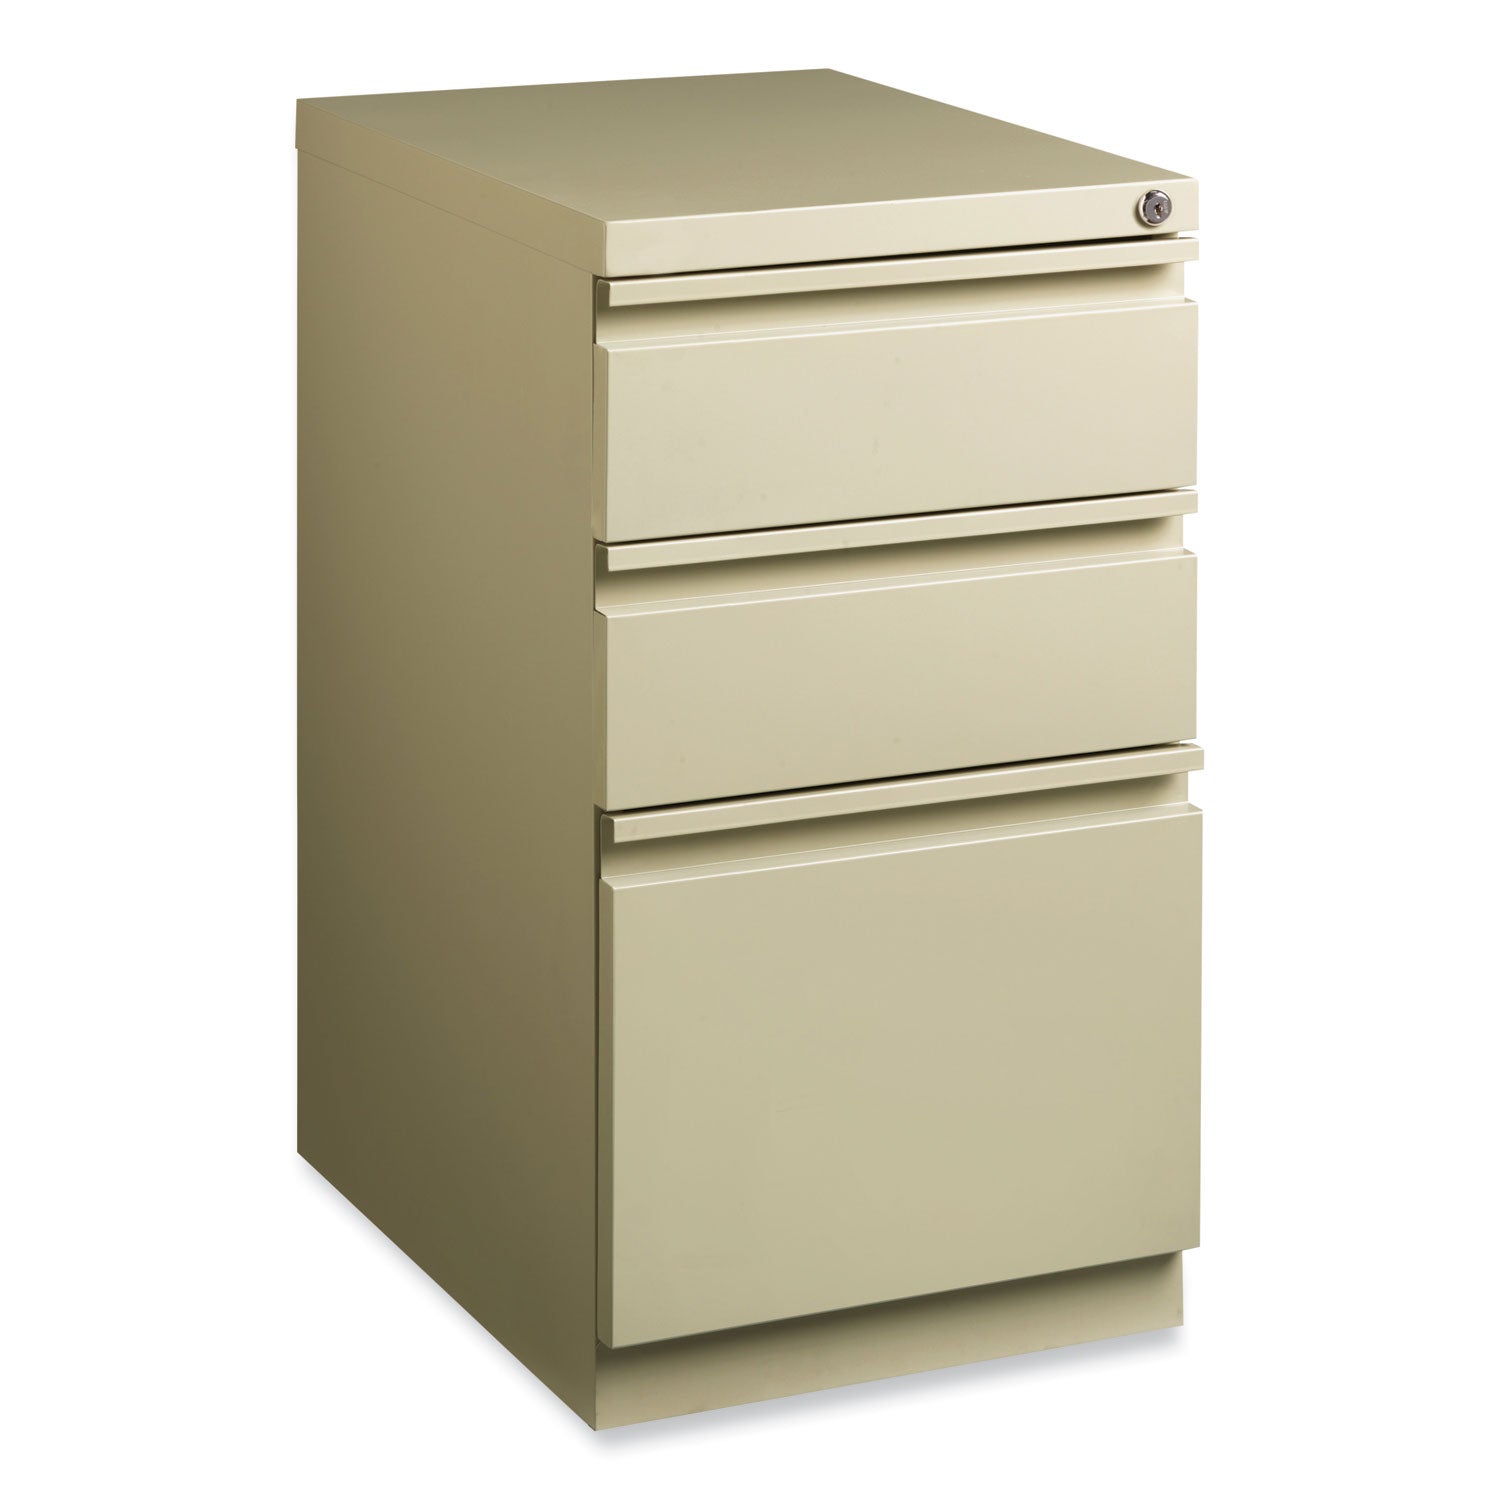 full-width-pull-20-deep-mobile-pedestal-file-box-box-file-letter-putty-15-x-1988-x-2775-ships-in-4-6-business-days_hid18574 - 1